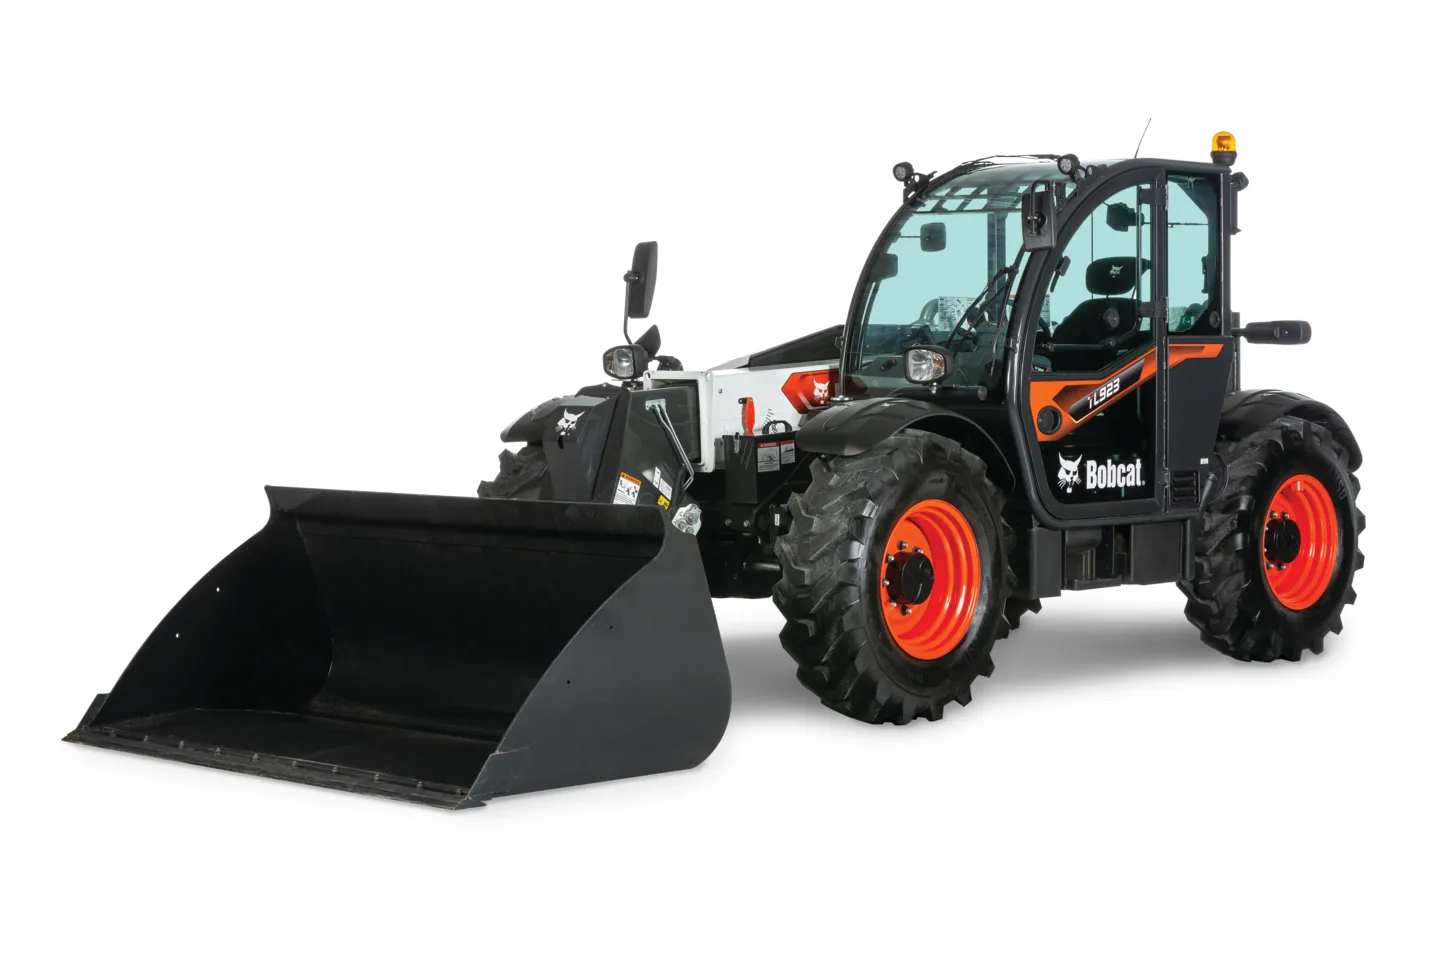 Browse Specs and more for the TL723 Telehandler - K.C. Bobcat